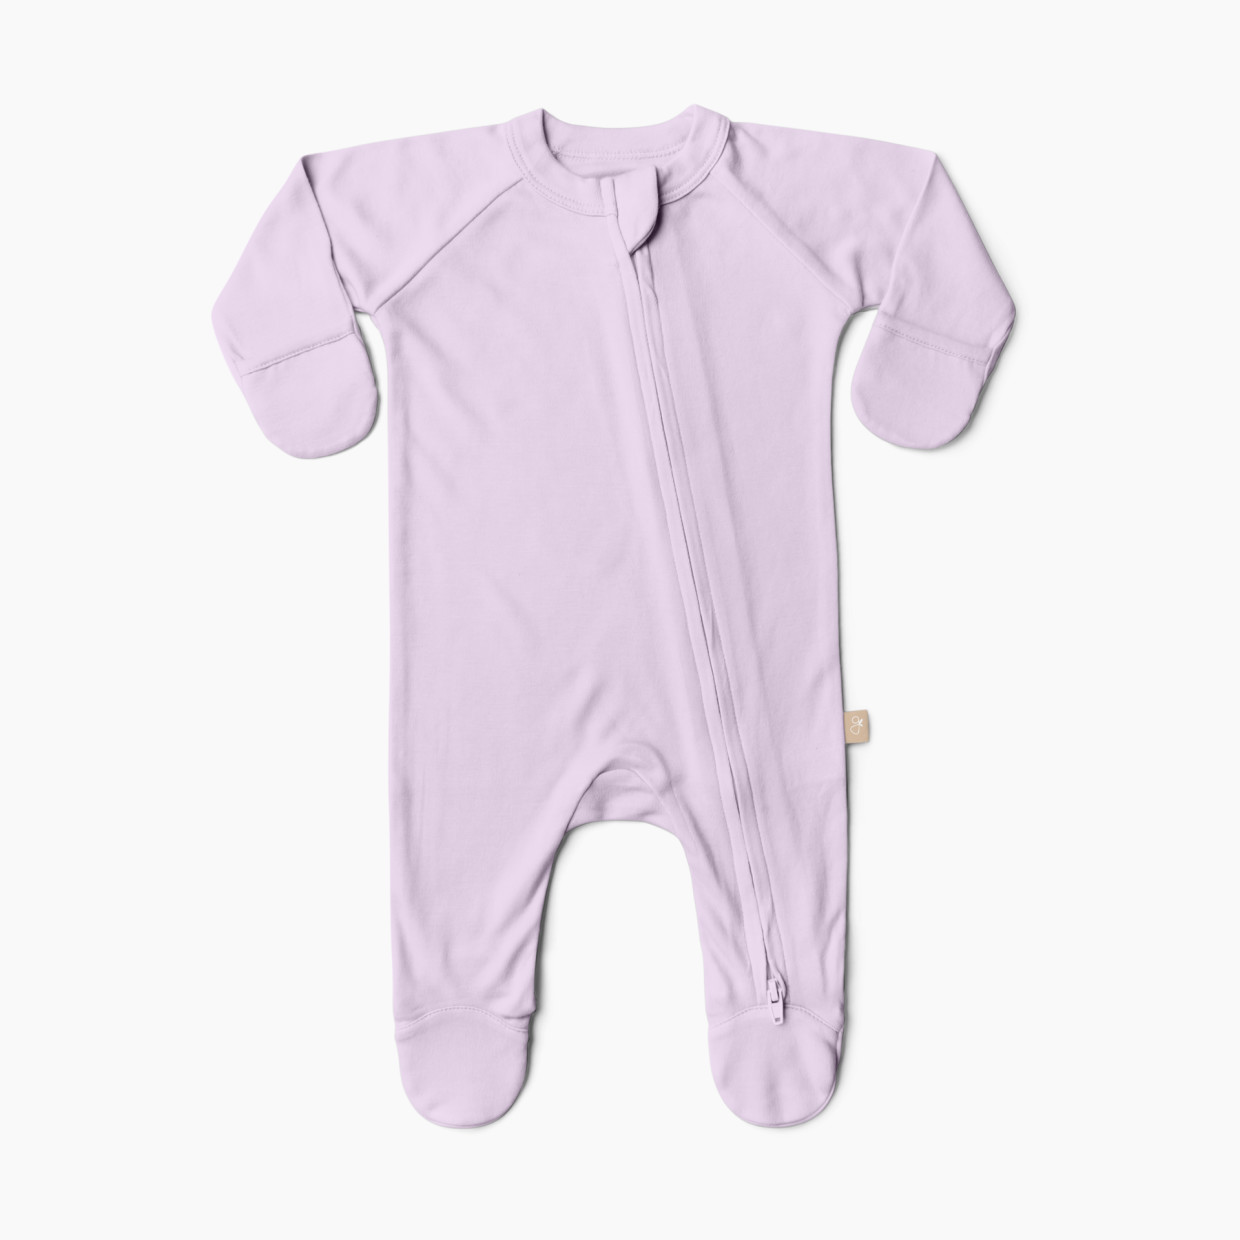 Goumi Kids x Babylist Grow With You Footie - Loose Fit - Lilac, 0-3 M.